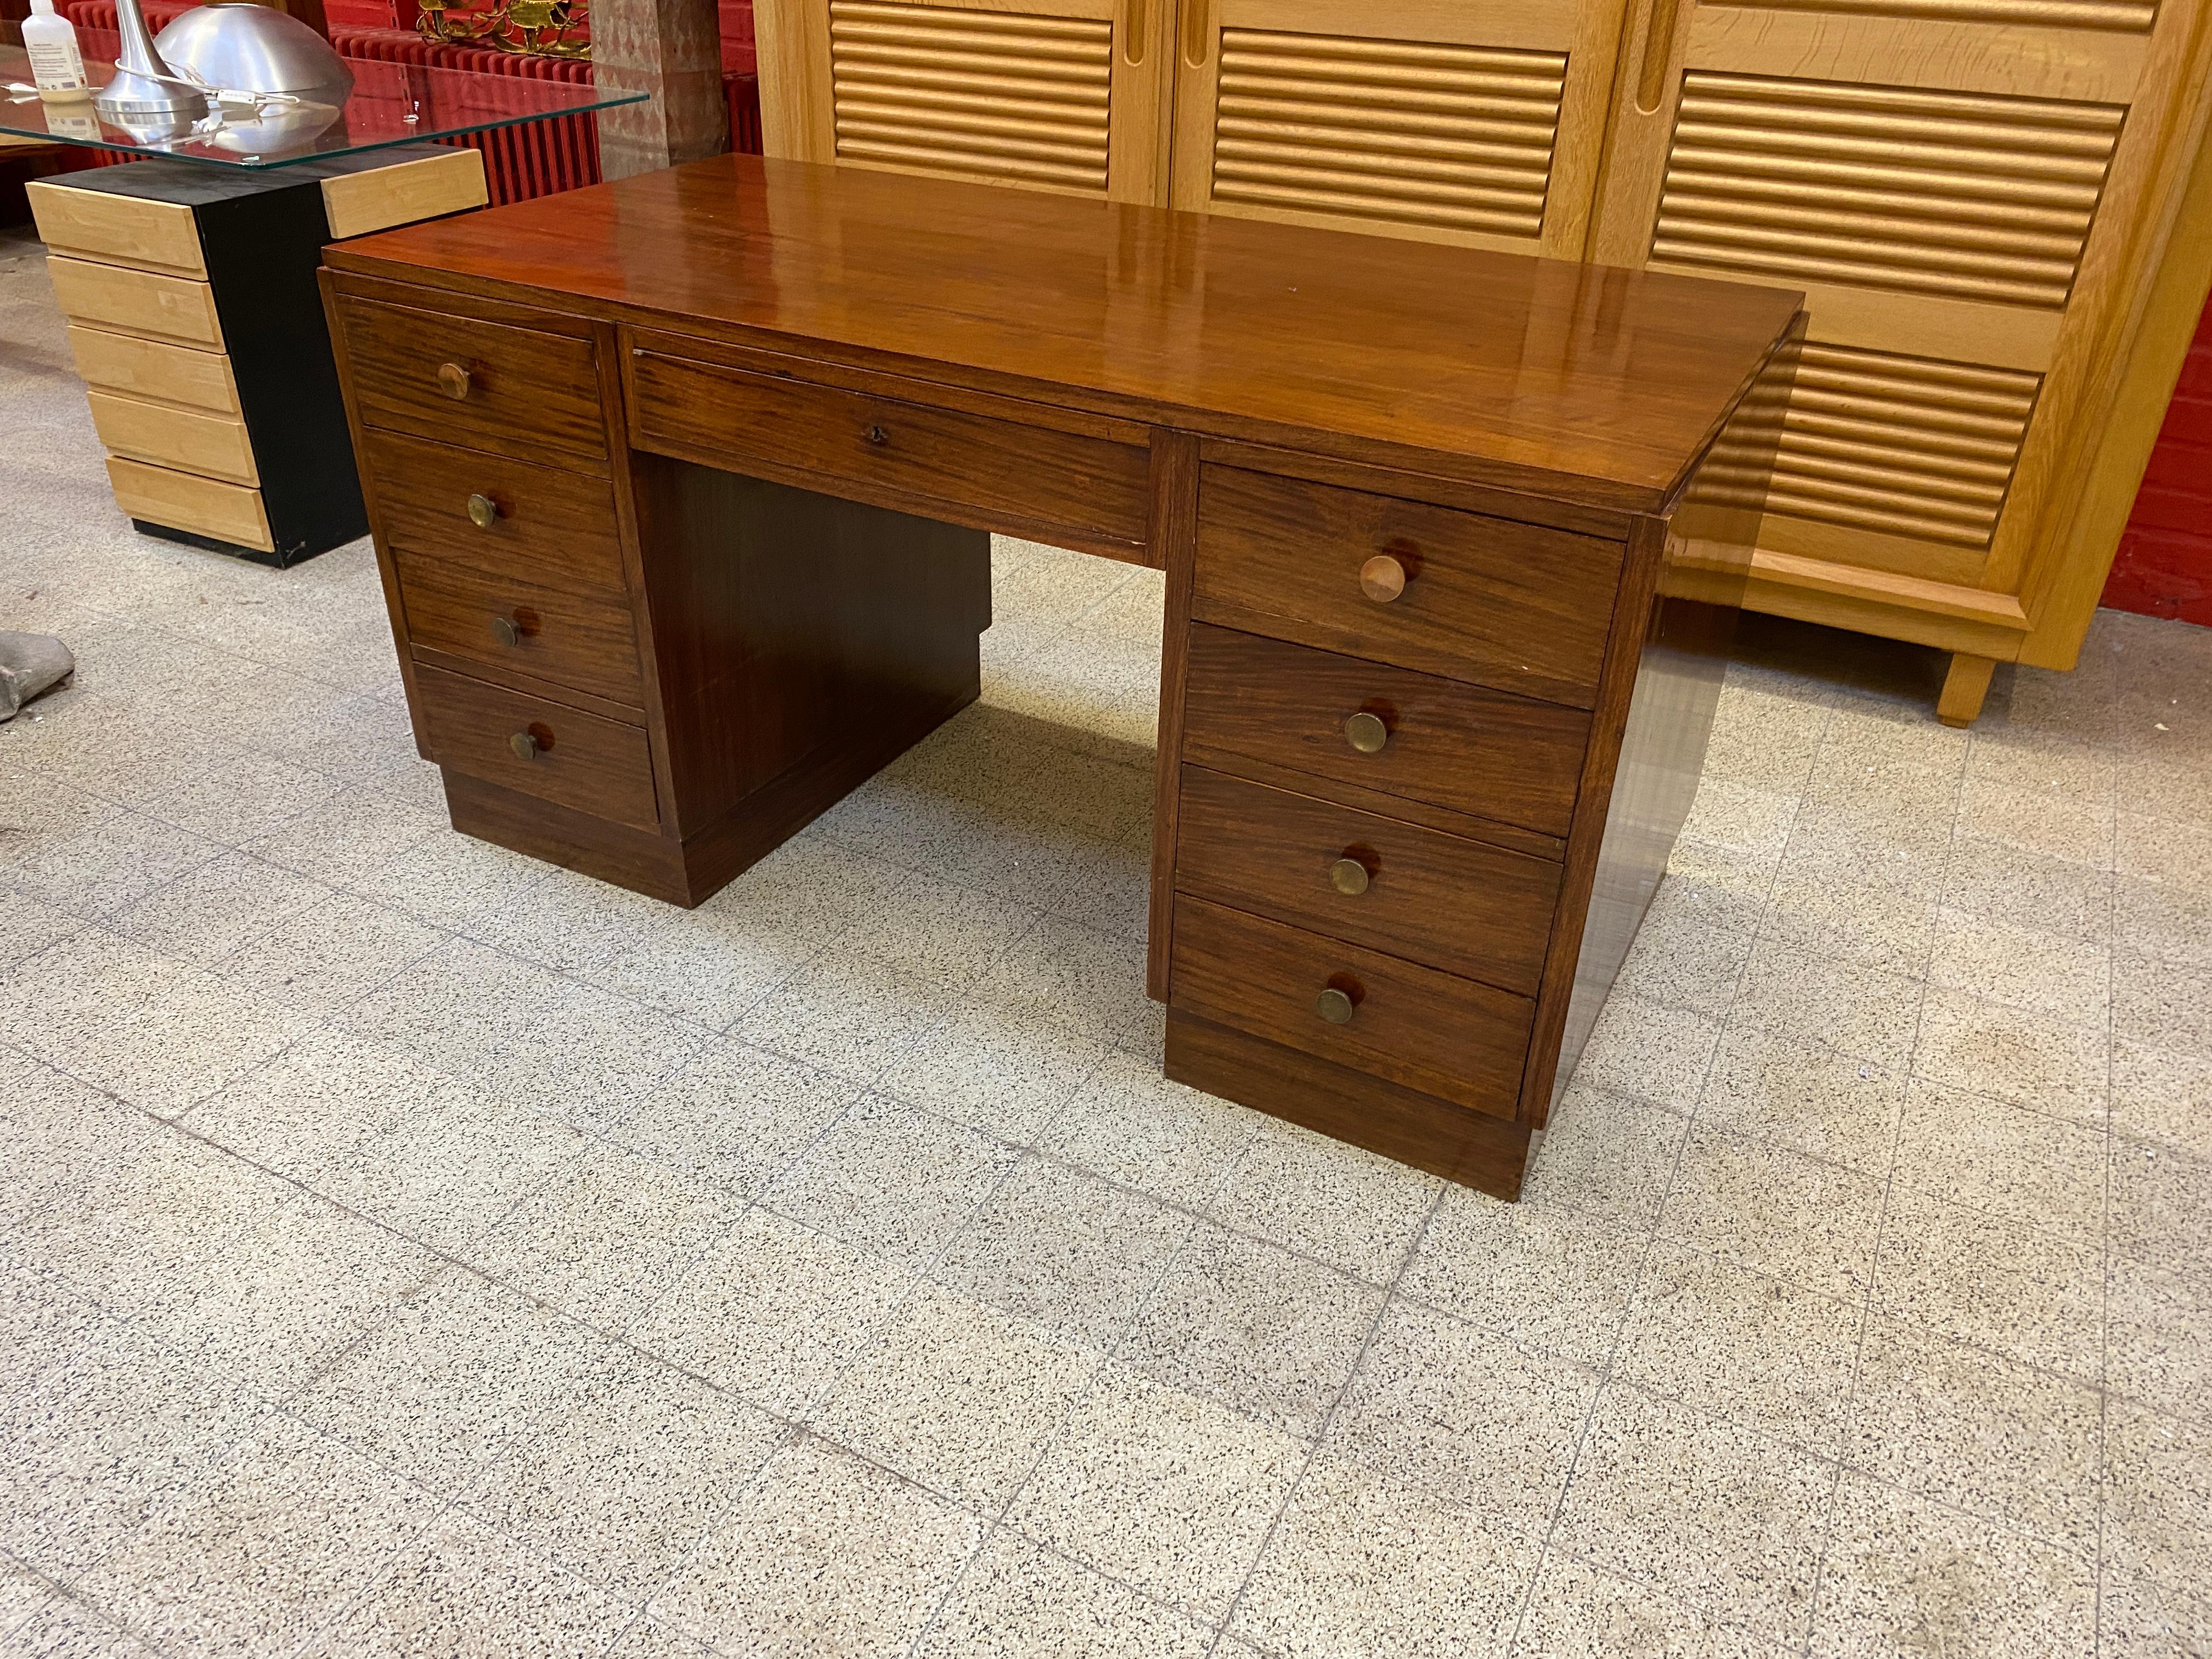 Elegant Art Deco Walnut Desk, circa 1930
Good general condition, varnish to review, and handles to repollier.